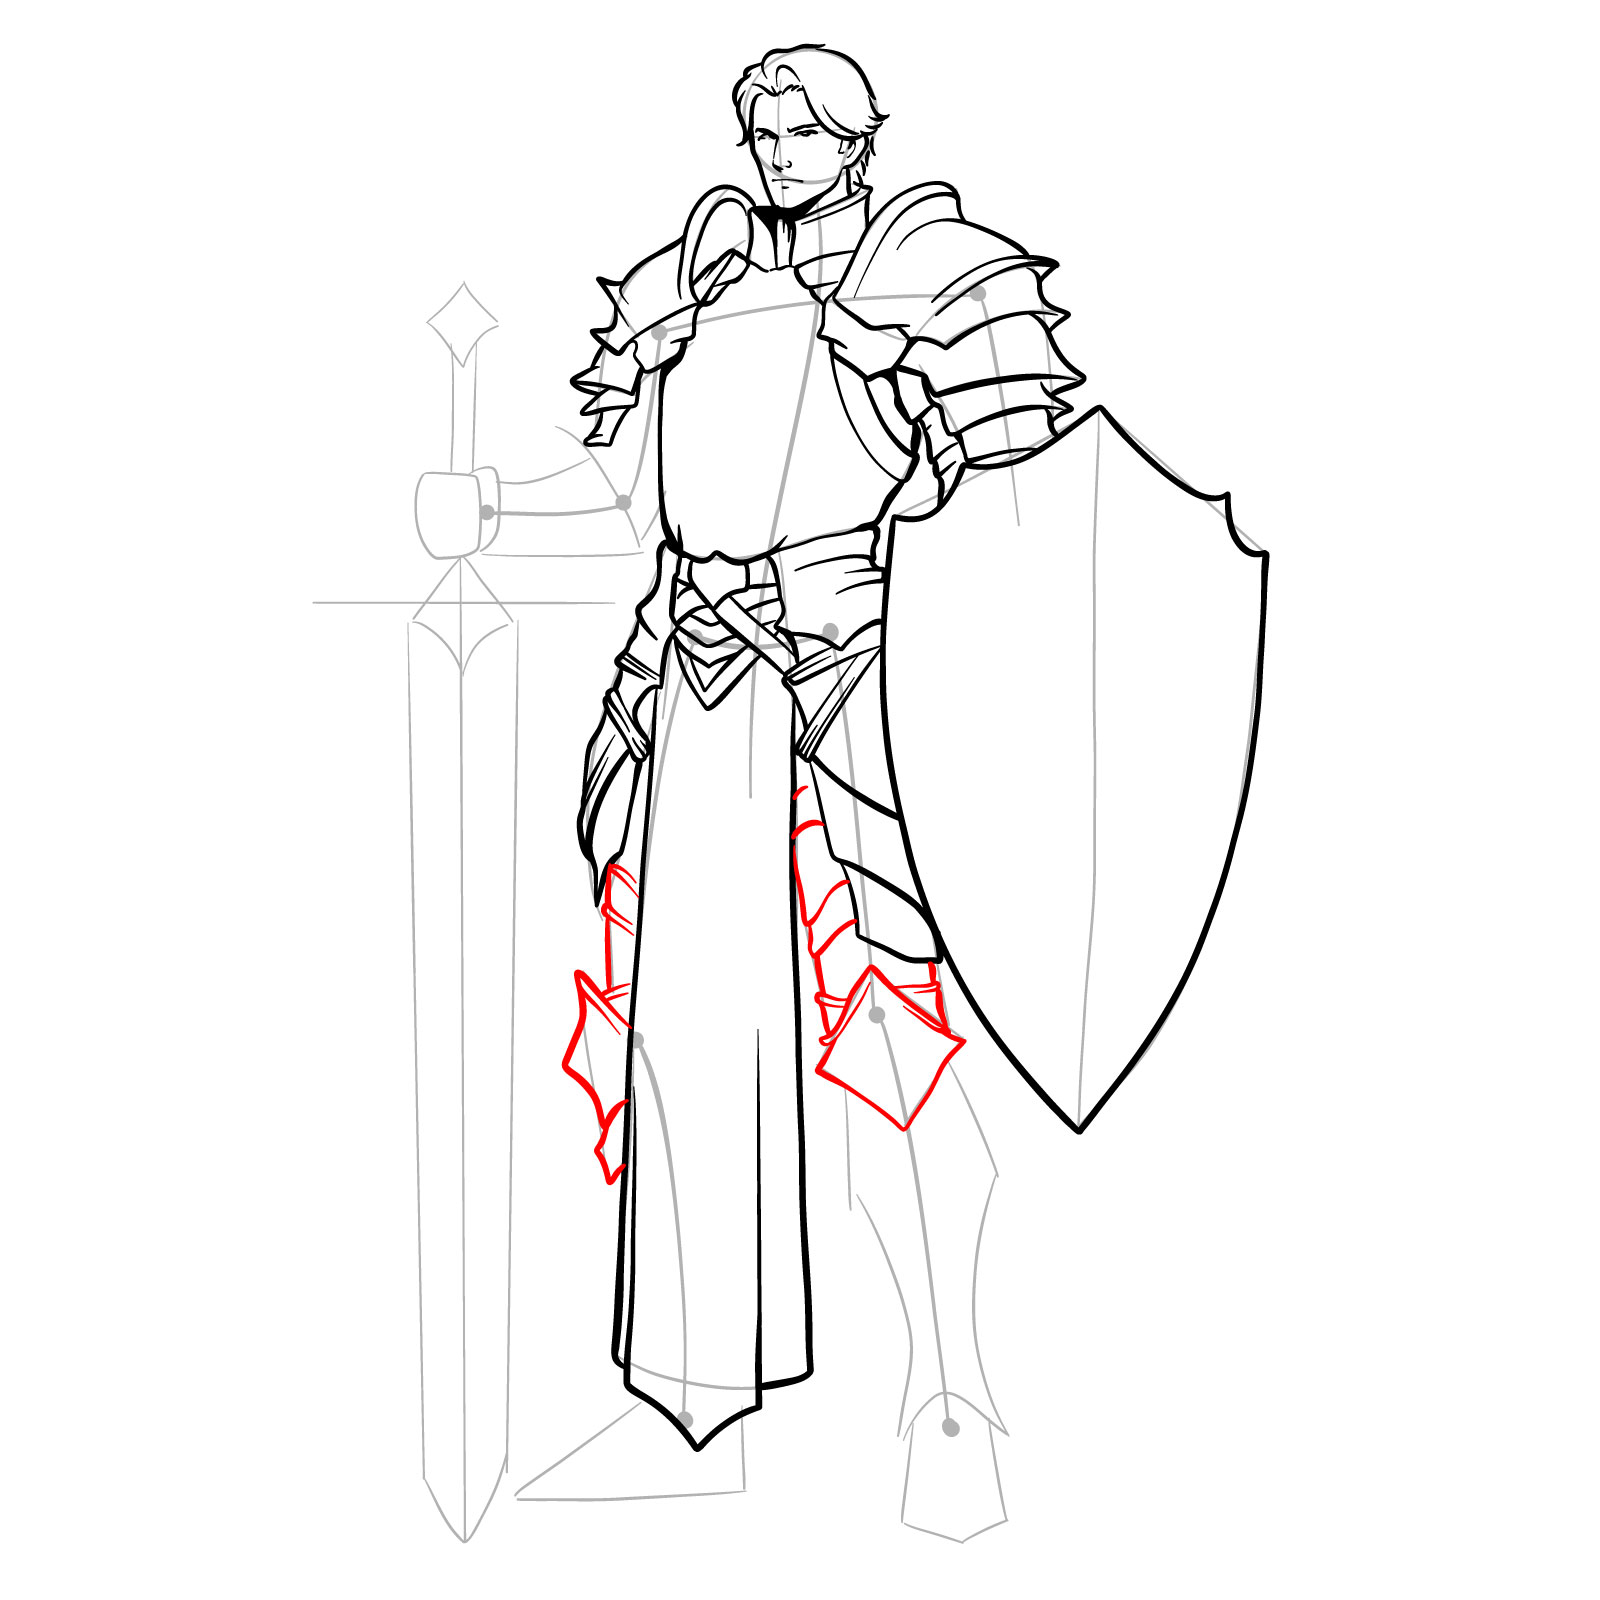 Sketching leg armor and knee protection on the paladin - step 16